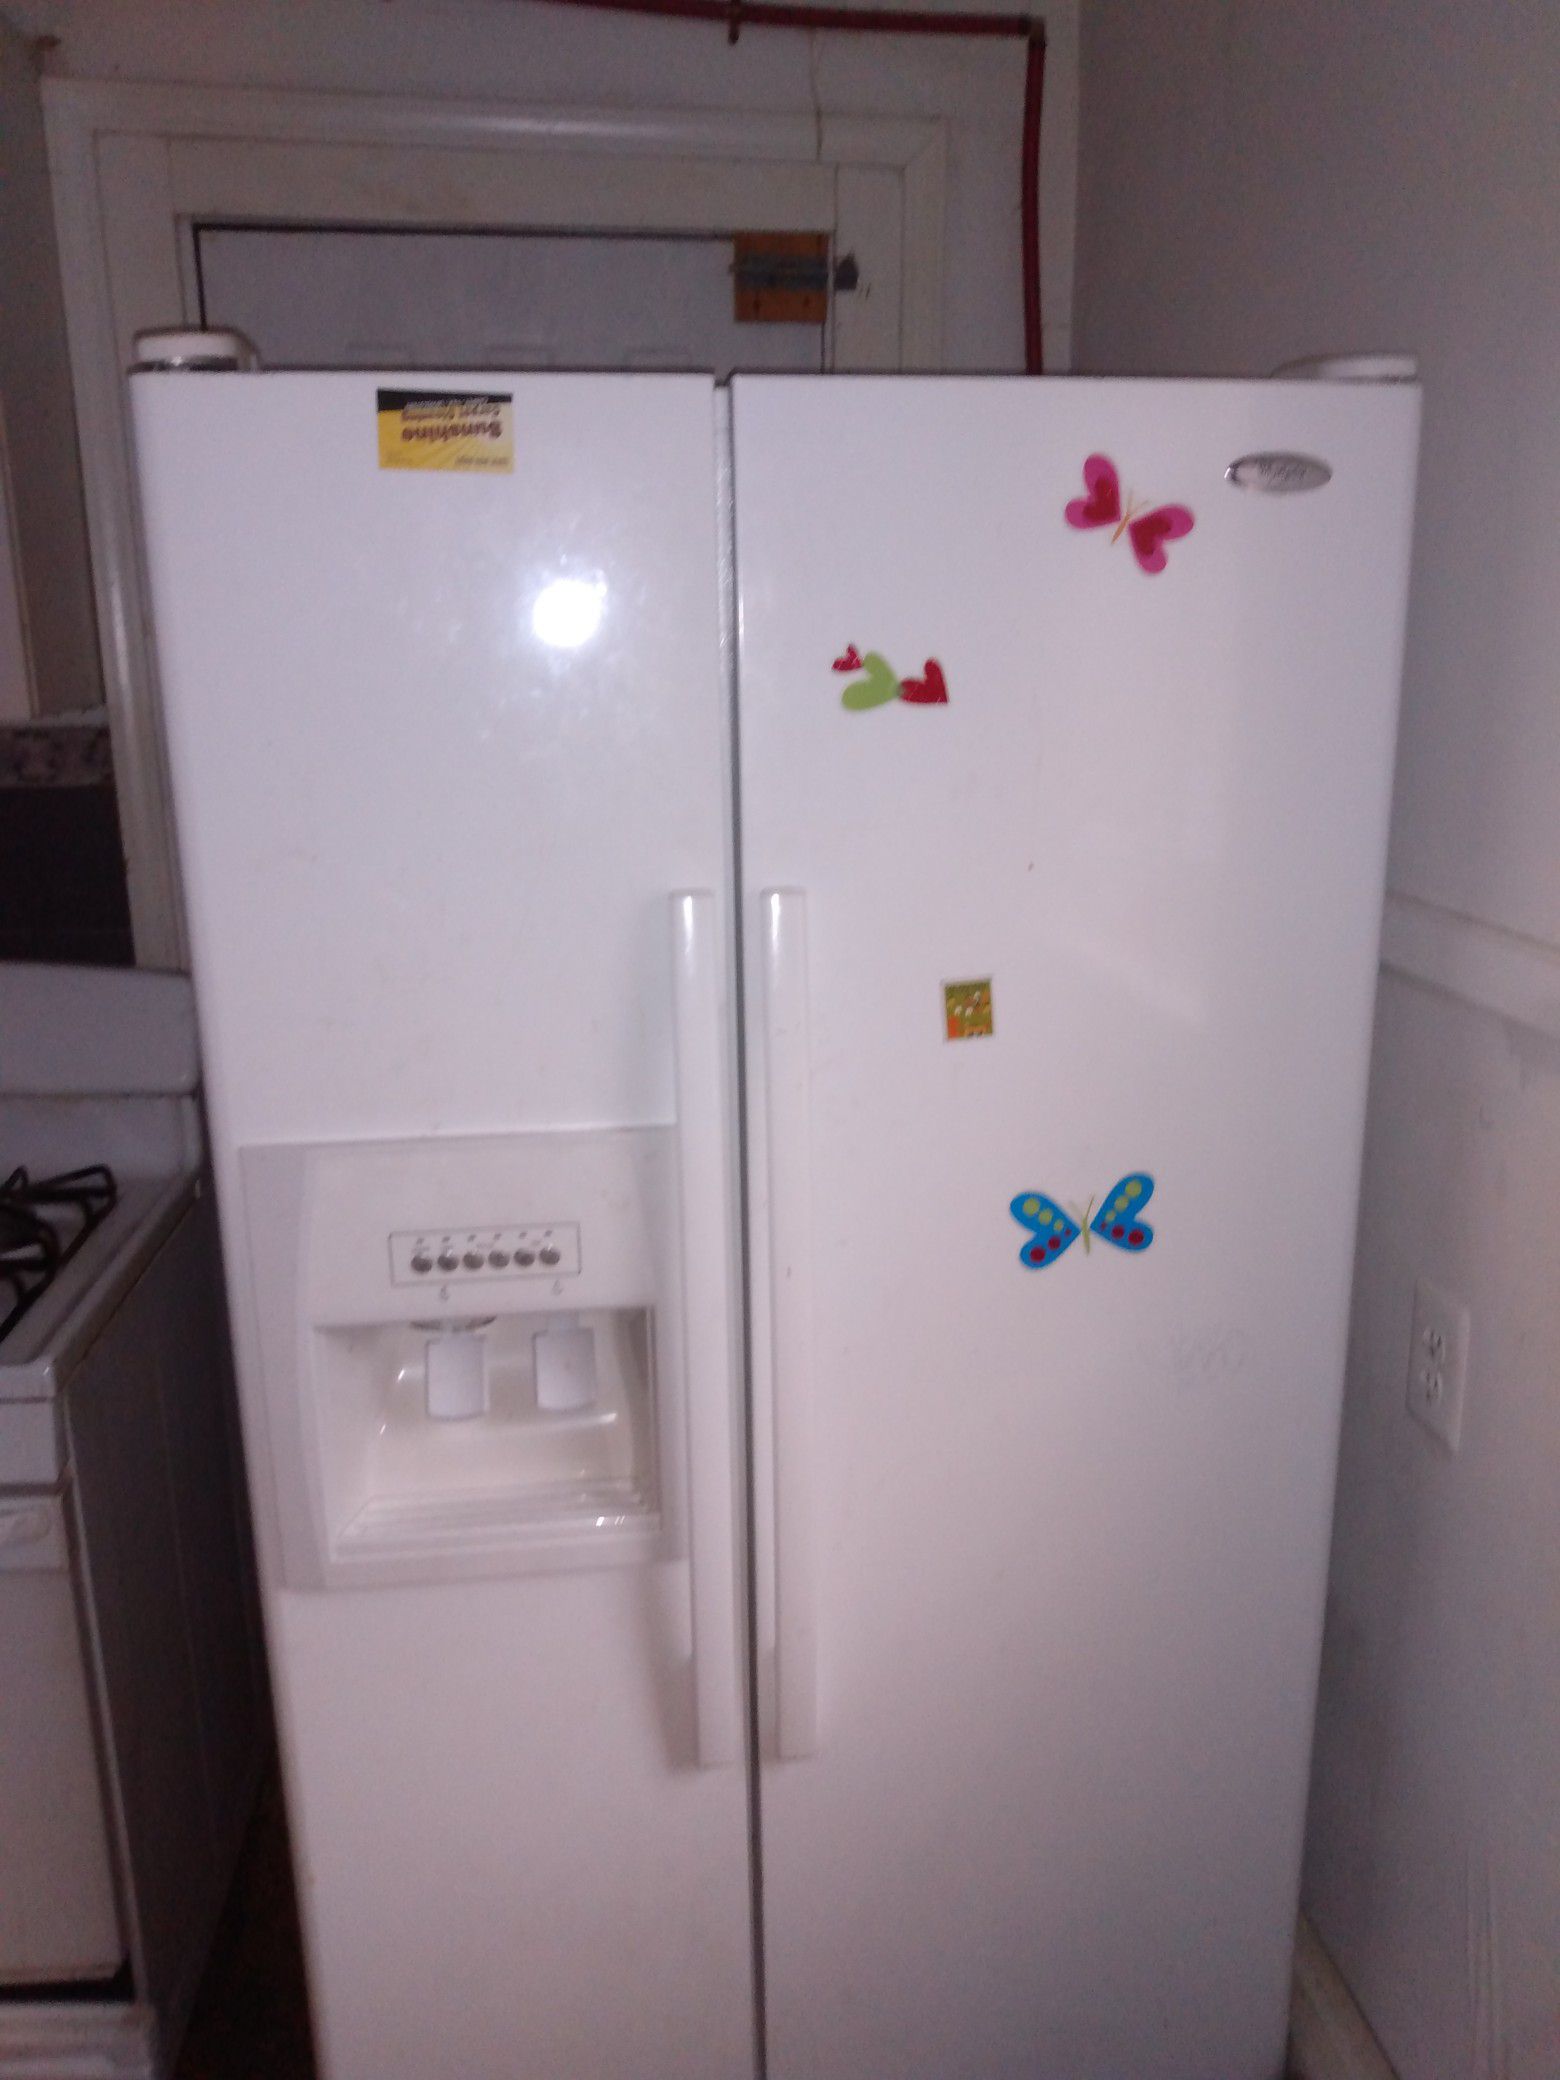 Whirlpool refrigerator side by side Kenmore washing machine 500 series in a Kenmore dryer 80 series